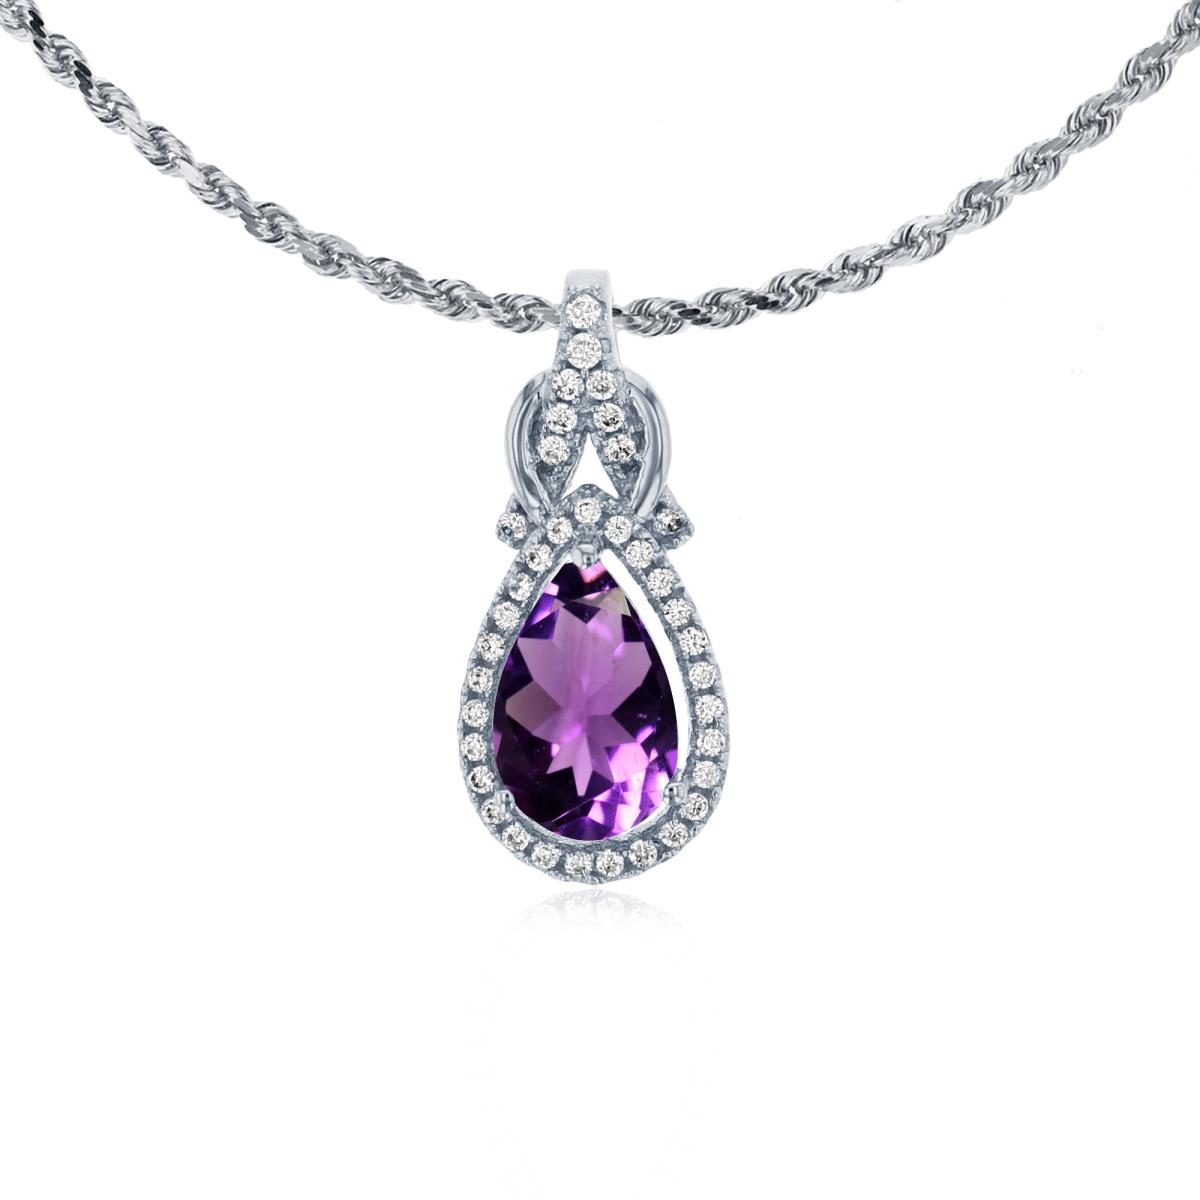 14K White Gold 8x5mm Pear Cut Amethyst & 0.11 CTTW Rnd Diamond Knot 18" Rope Chain Necklace